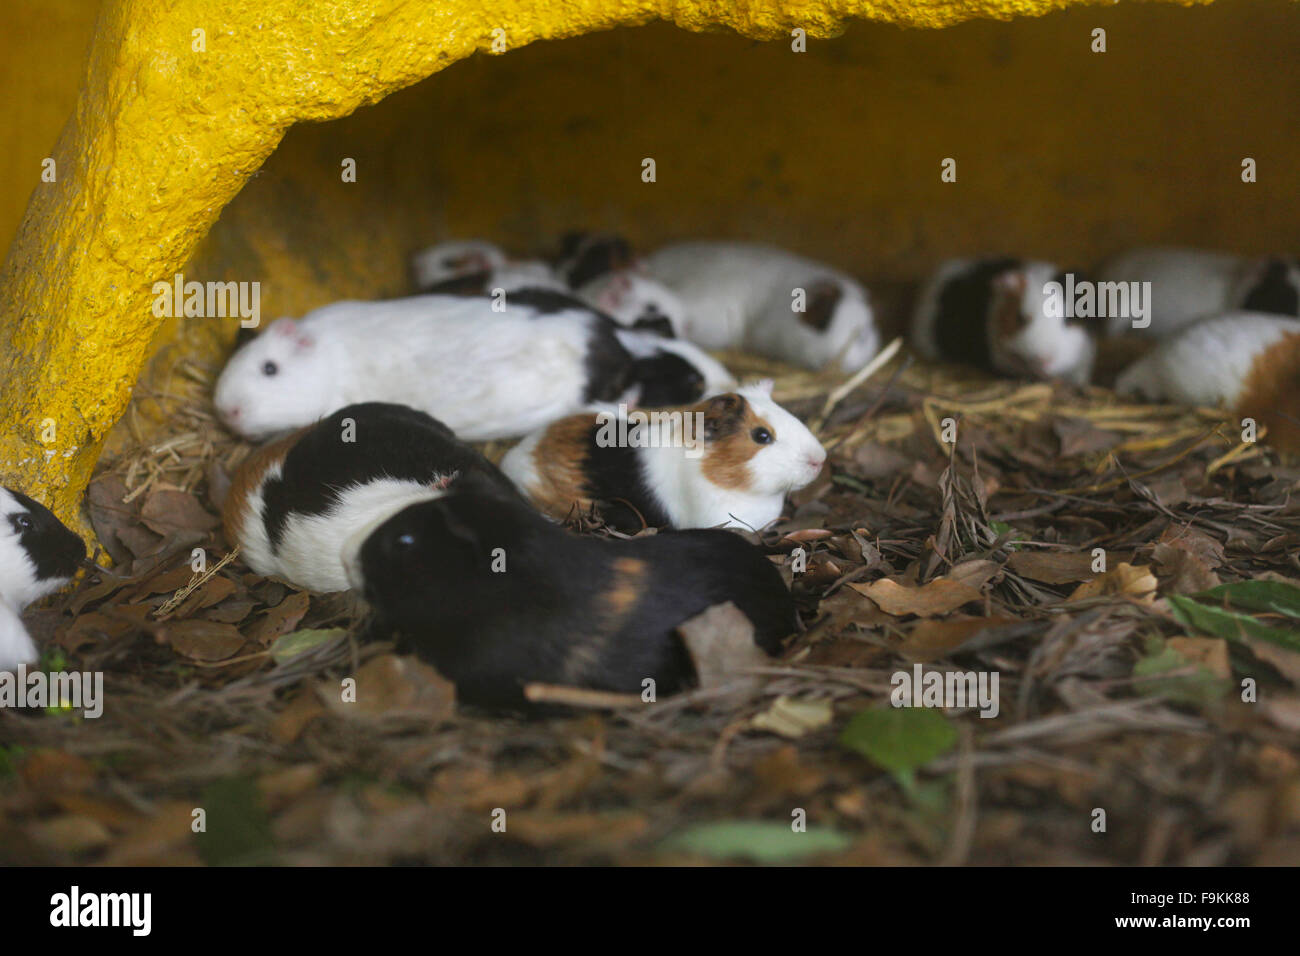 Guinea pigs. National trust nature central zoo, Nepal Stock Photo - Alamy